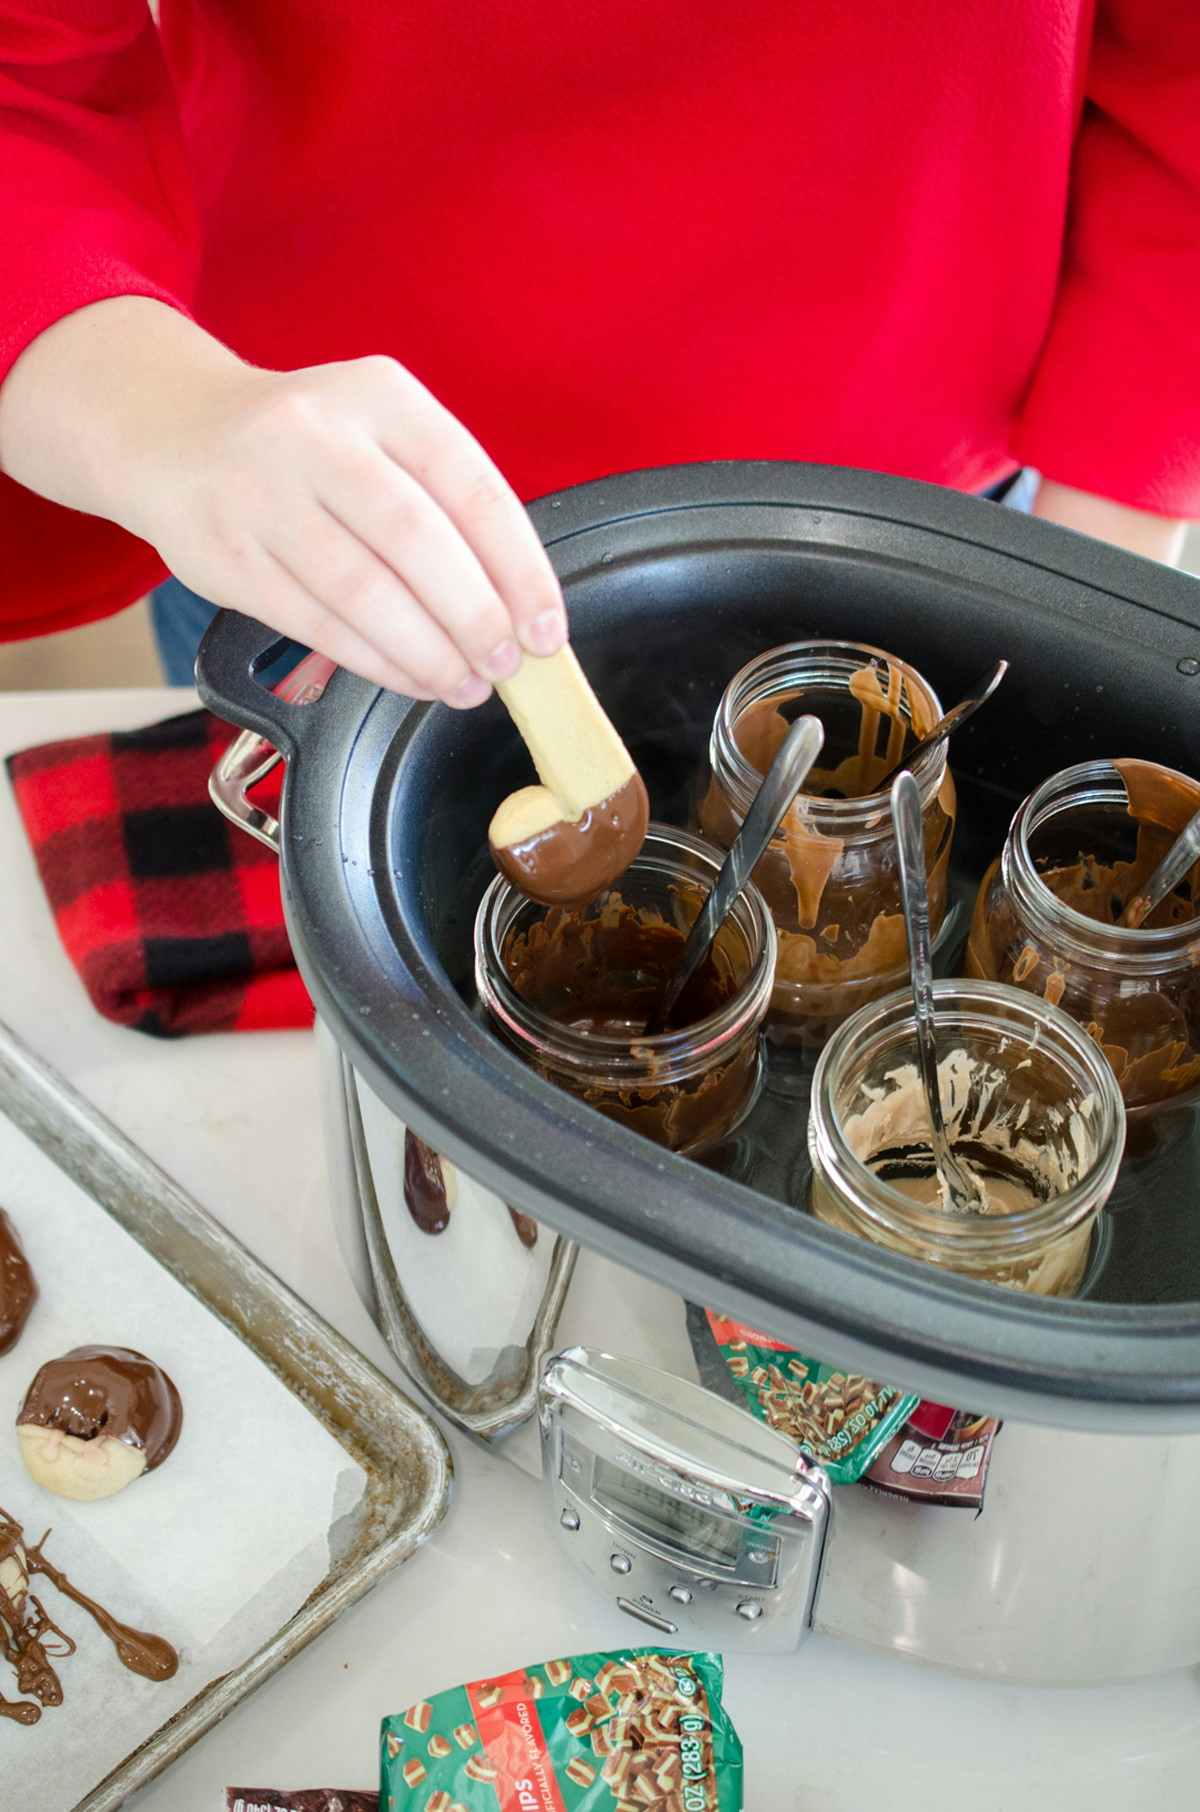 Melt chocolate and keep it melted in a slow cooker.